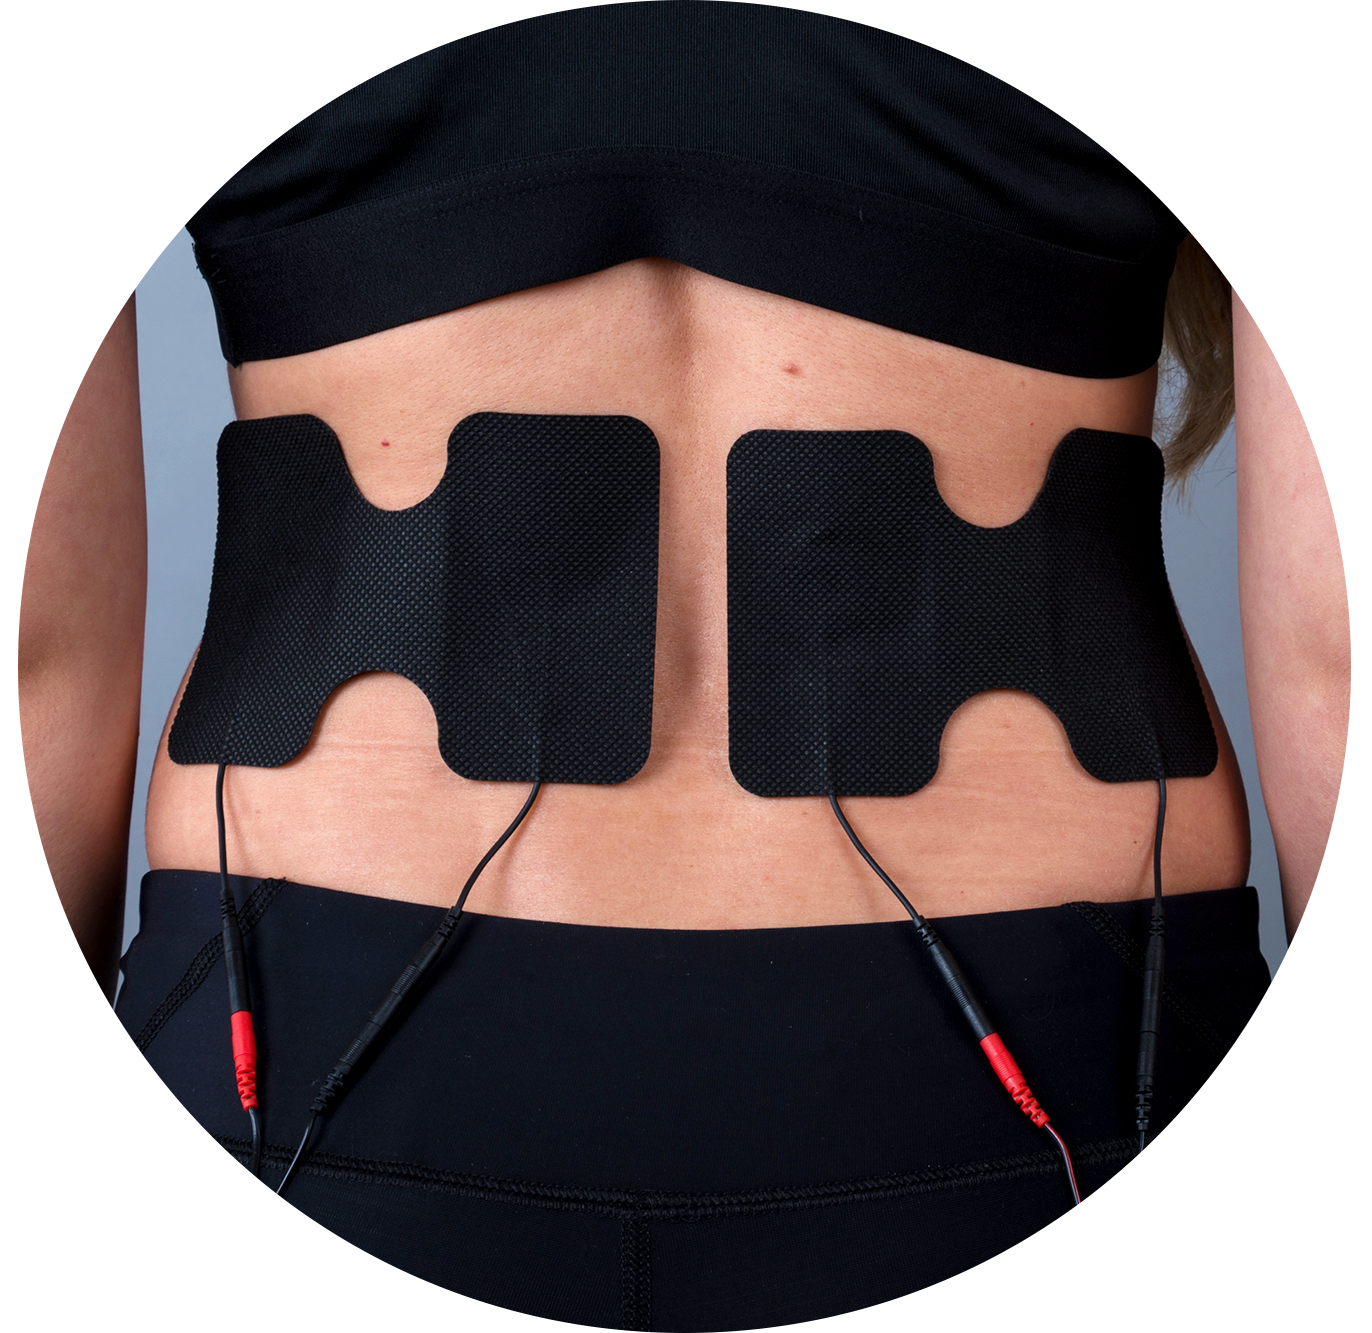 Abdominal Muscles Electrode Placement for Compex Muscle Stimulators 